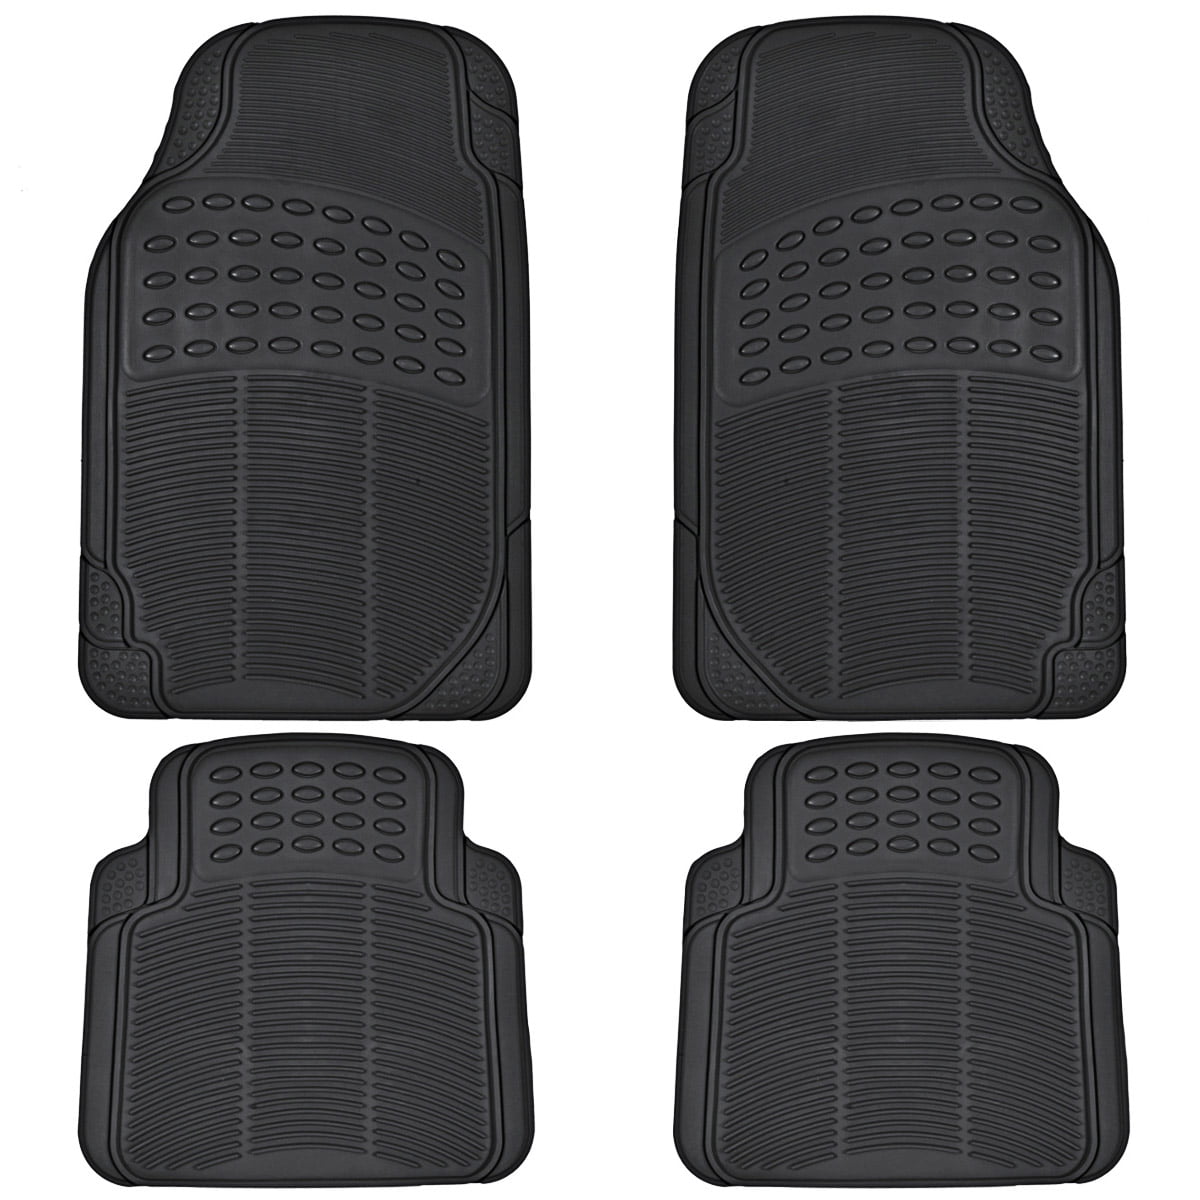 4pcs Floor Mats for Auto Car SUV Van Heavy Duty All Weather Trimmable Black 